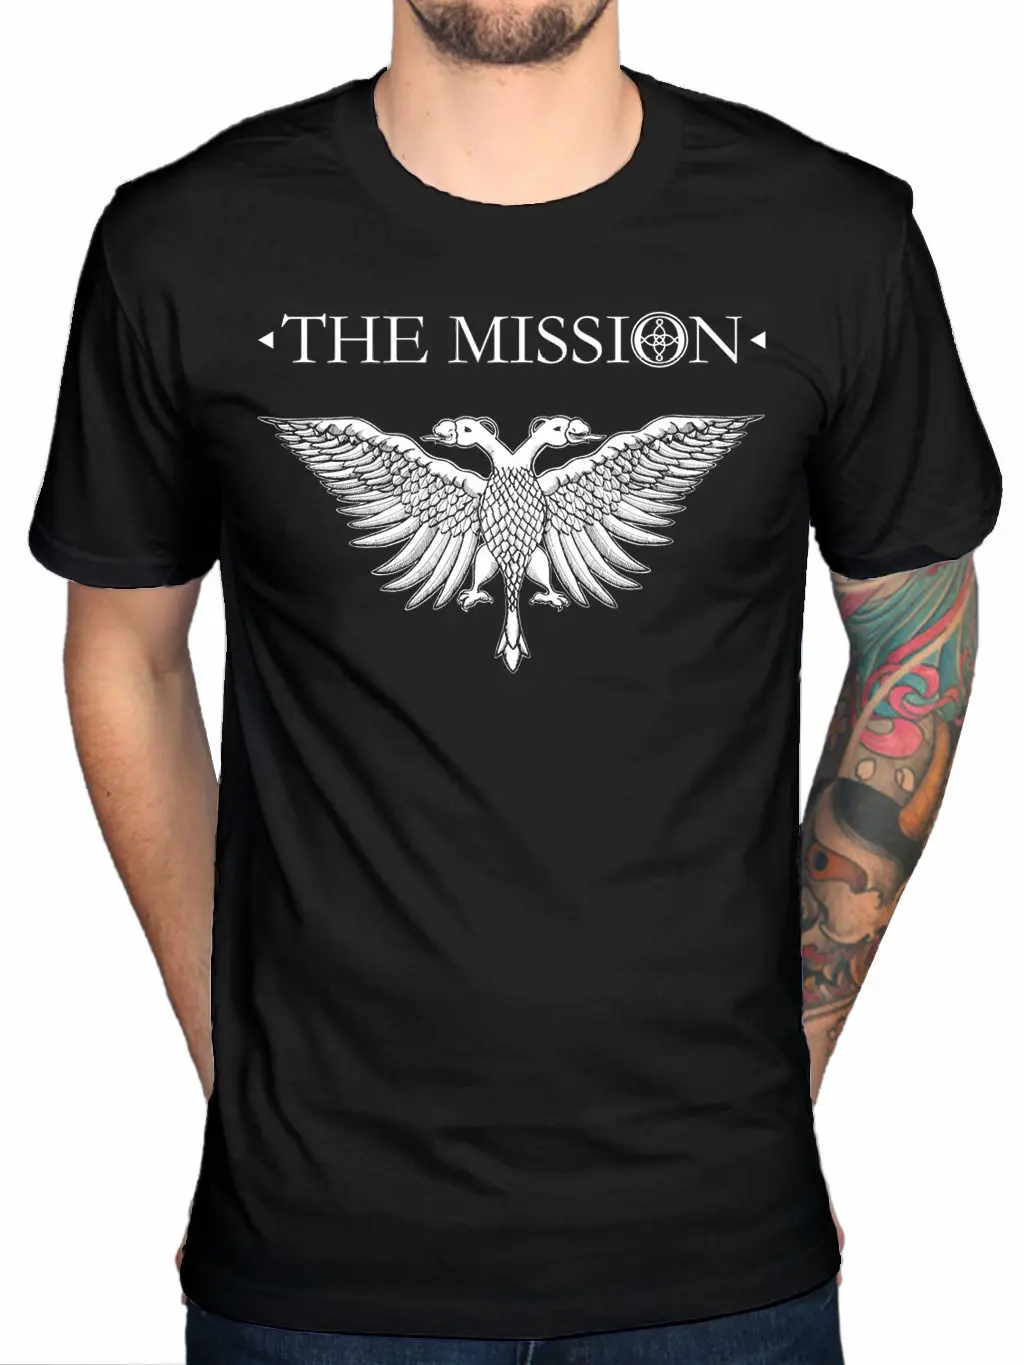 

**SALE** Official The Mission Solid Eagle 2 New Logo T-Shirt Rock Band Merch Short Sleeve Cheap Sale Cotton T Shirt